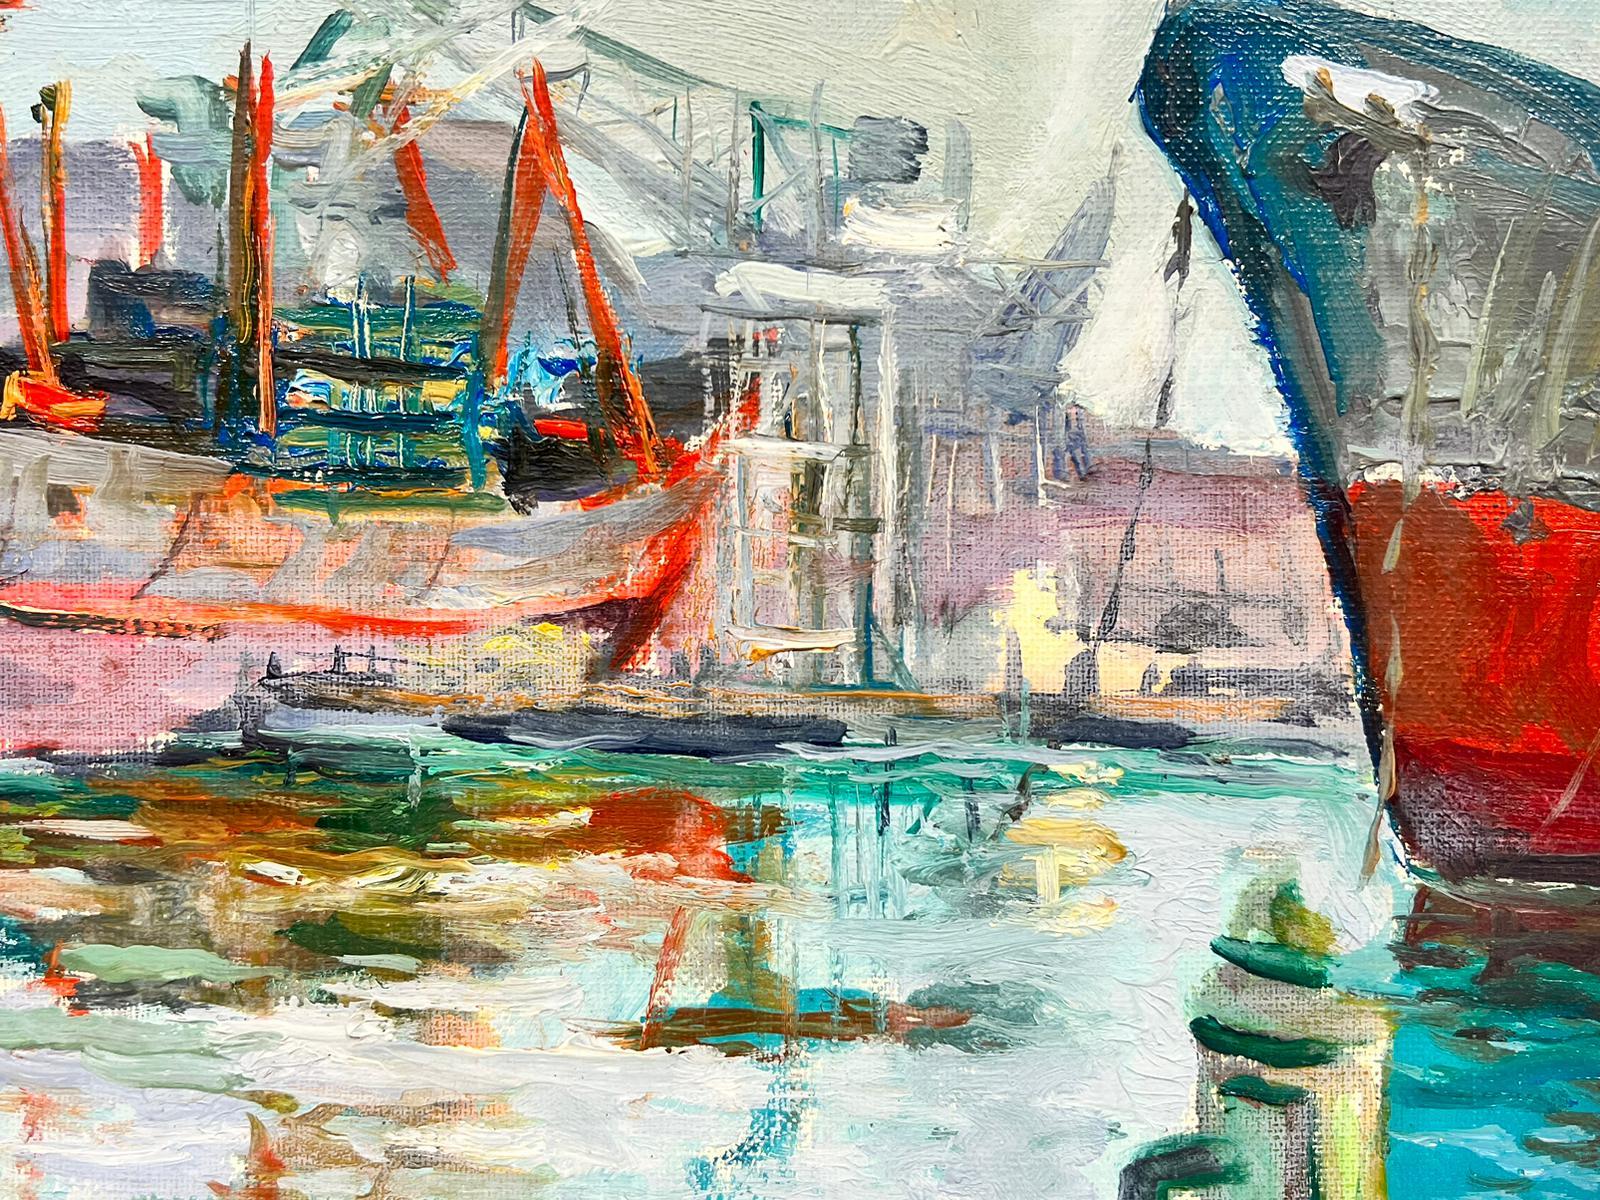 The Mediterranean Harbour (Marseille?)
French Post-Impressionist artist, mid century 
oil painting on canvas, unframed
painting: 11 x 14 inches
provenance: private collection, France 
condition: overall very good